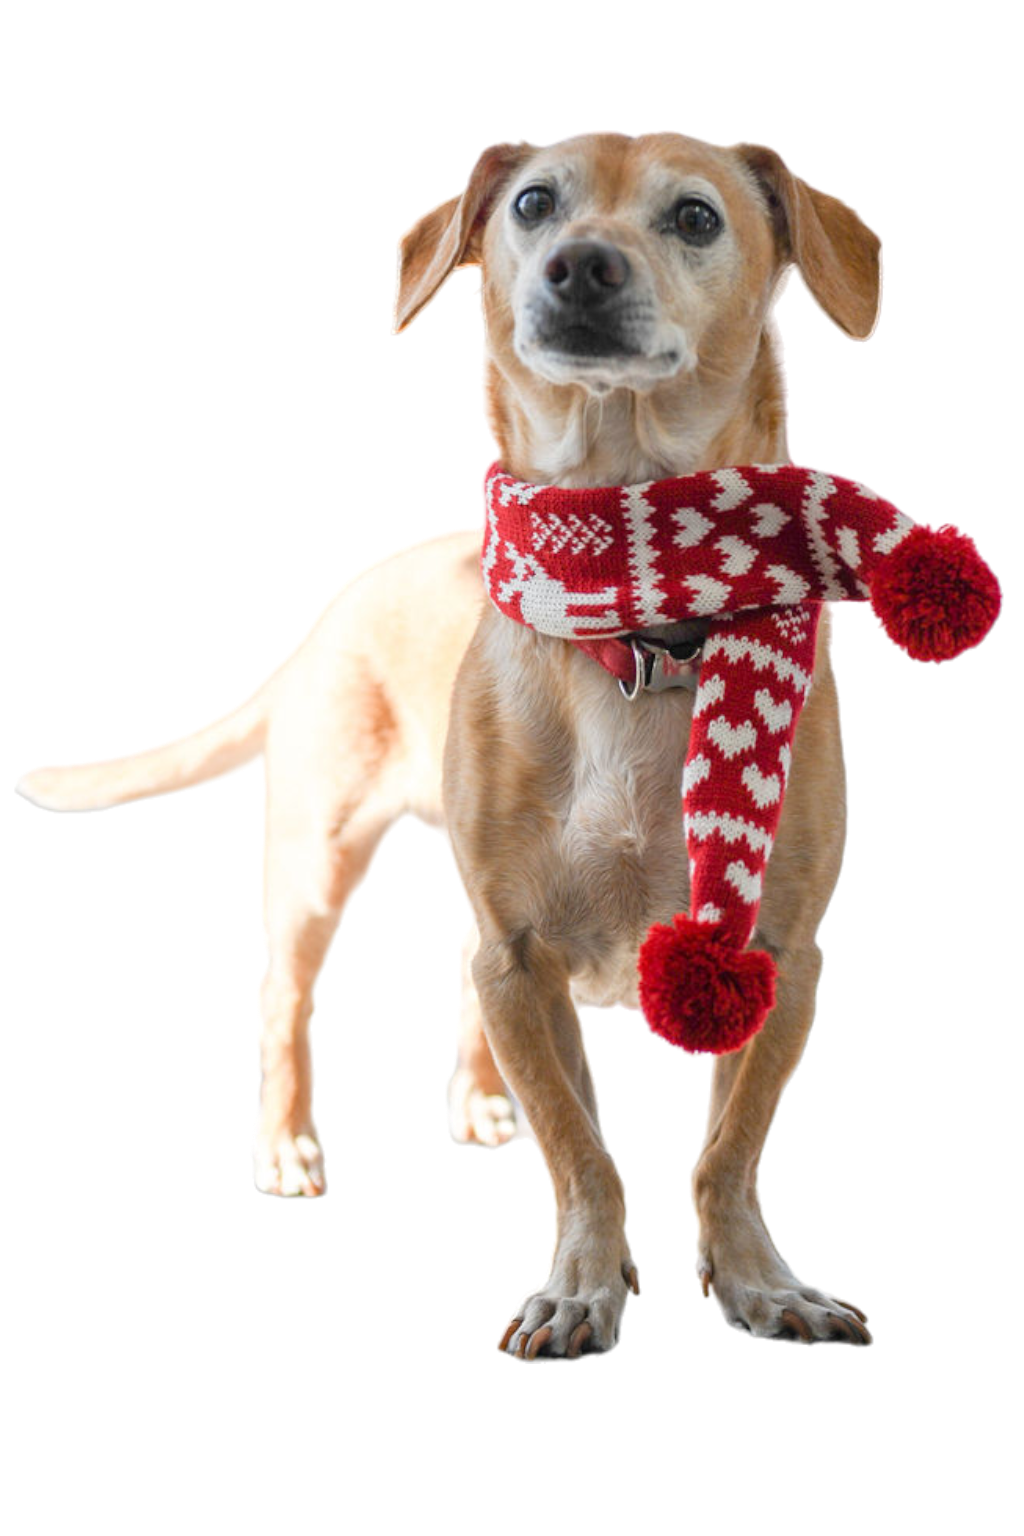 Indy the dog with red scarf